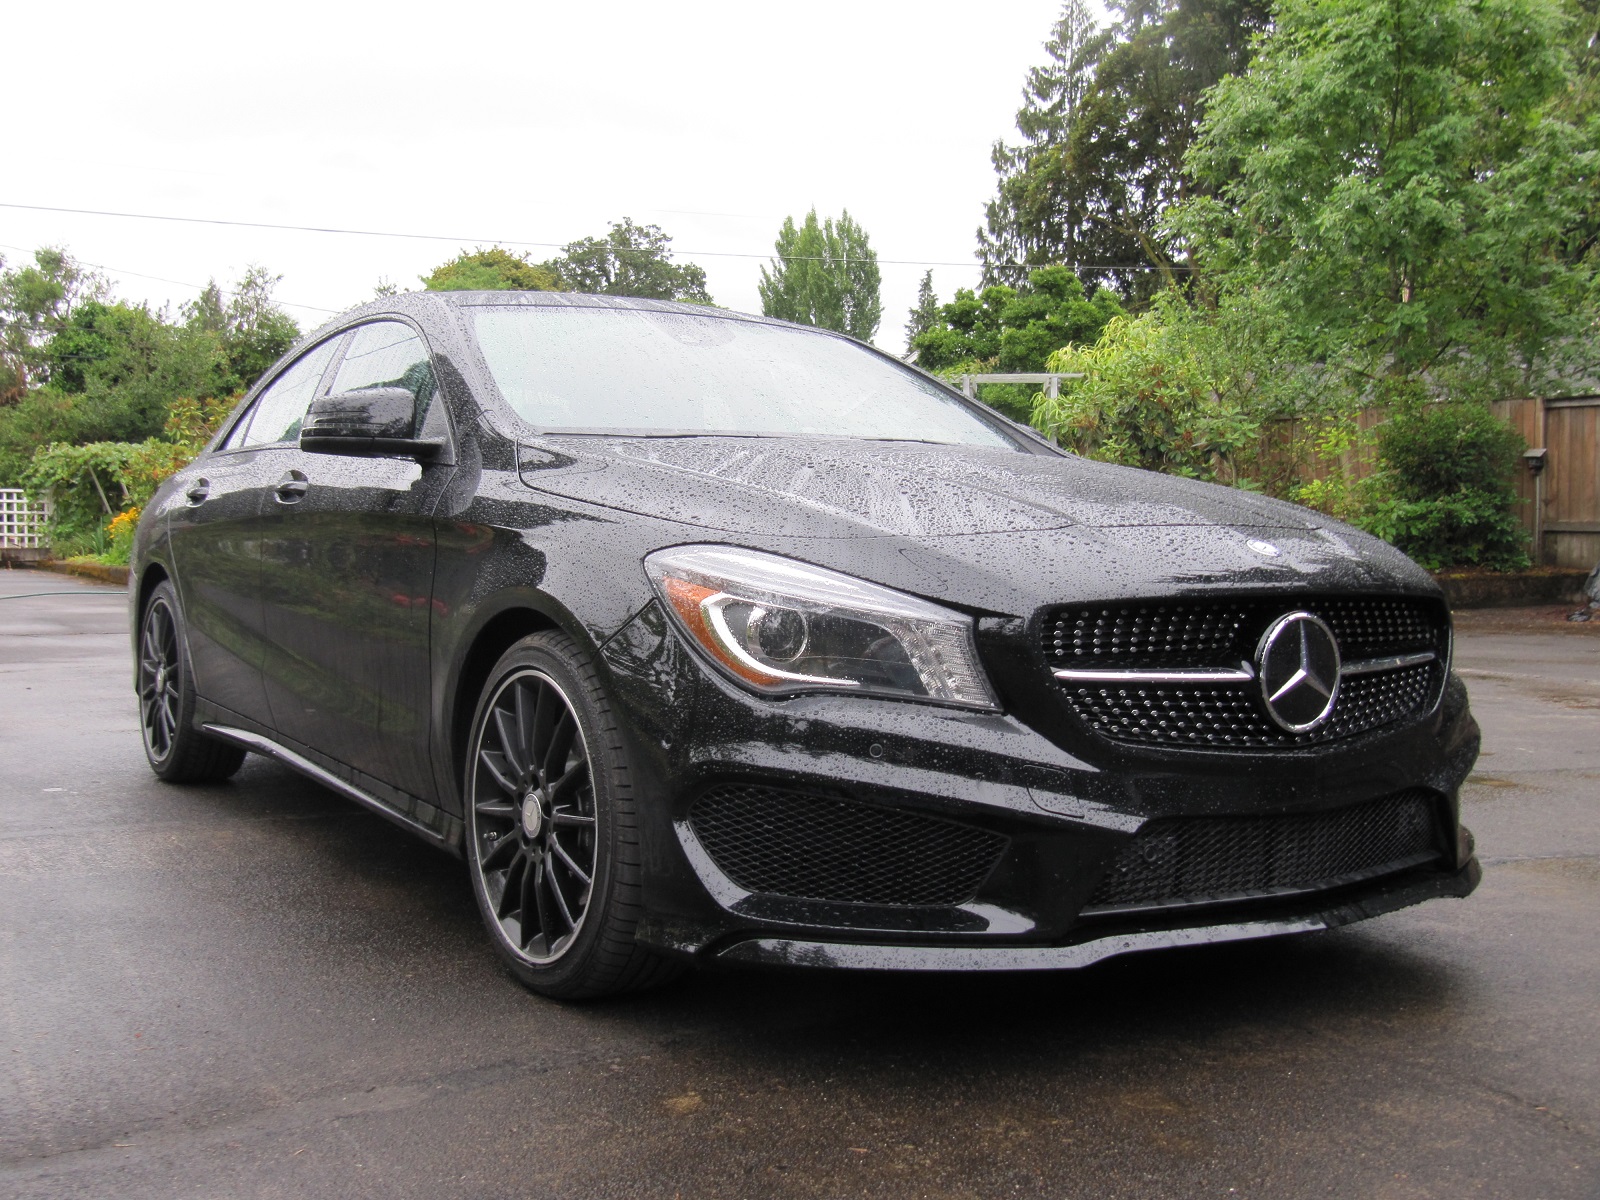 2014 Mercedes-Benz CLA 250: Gas Mileage Review Of Compact Luxury Sedan